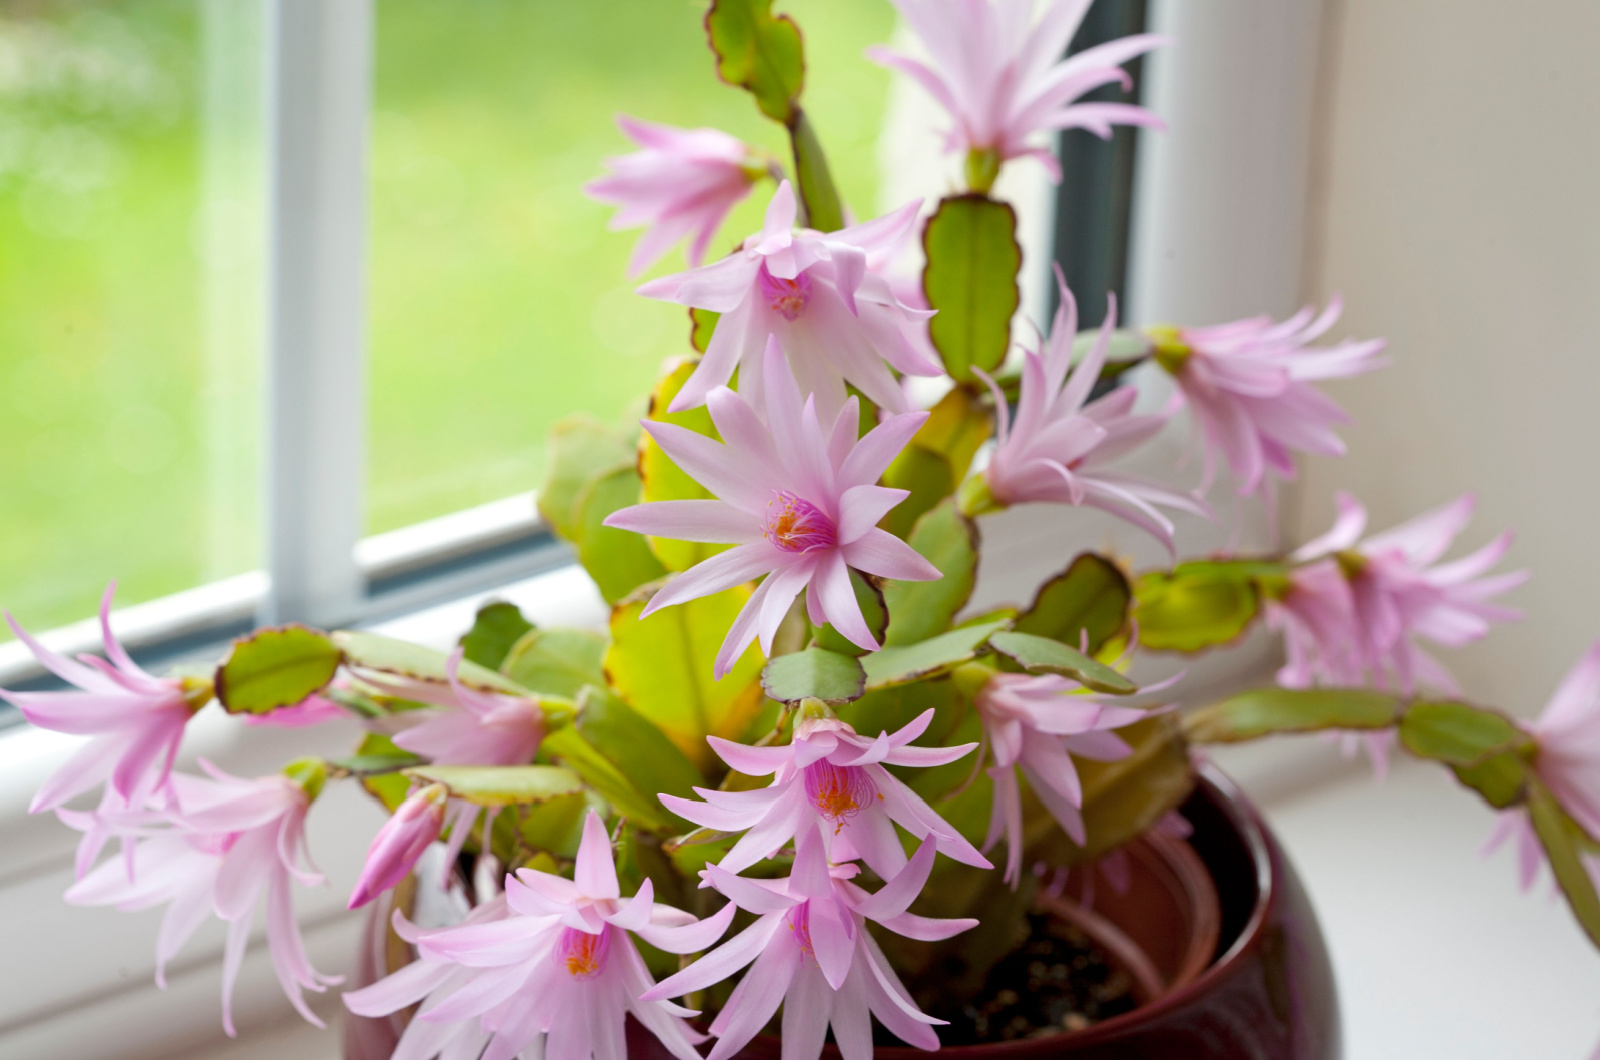 Easter Cactus Growing in a Pot by a window